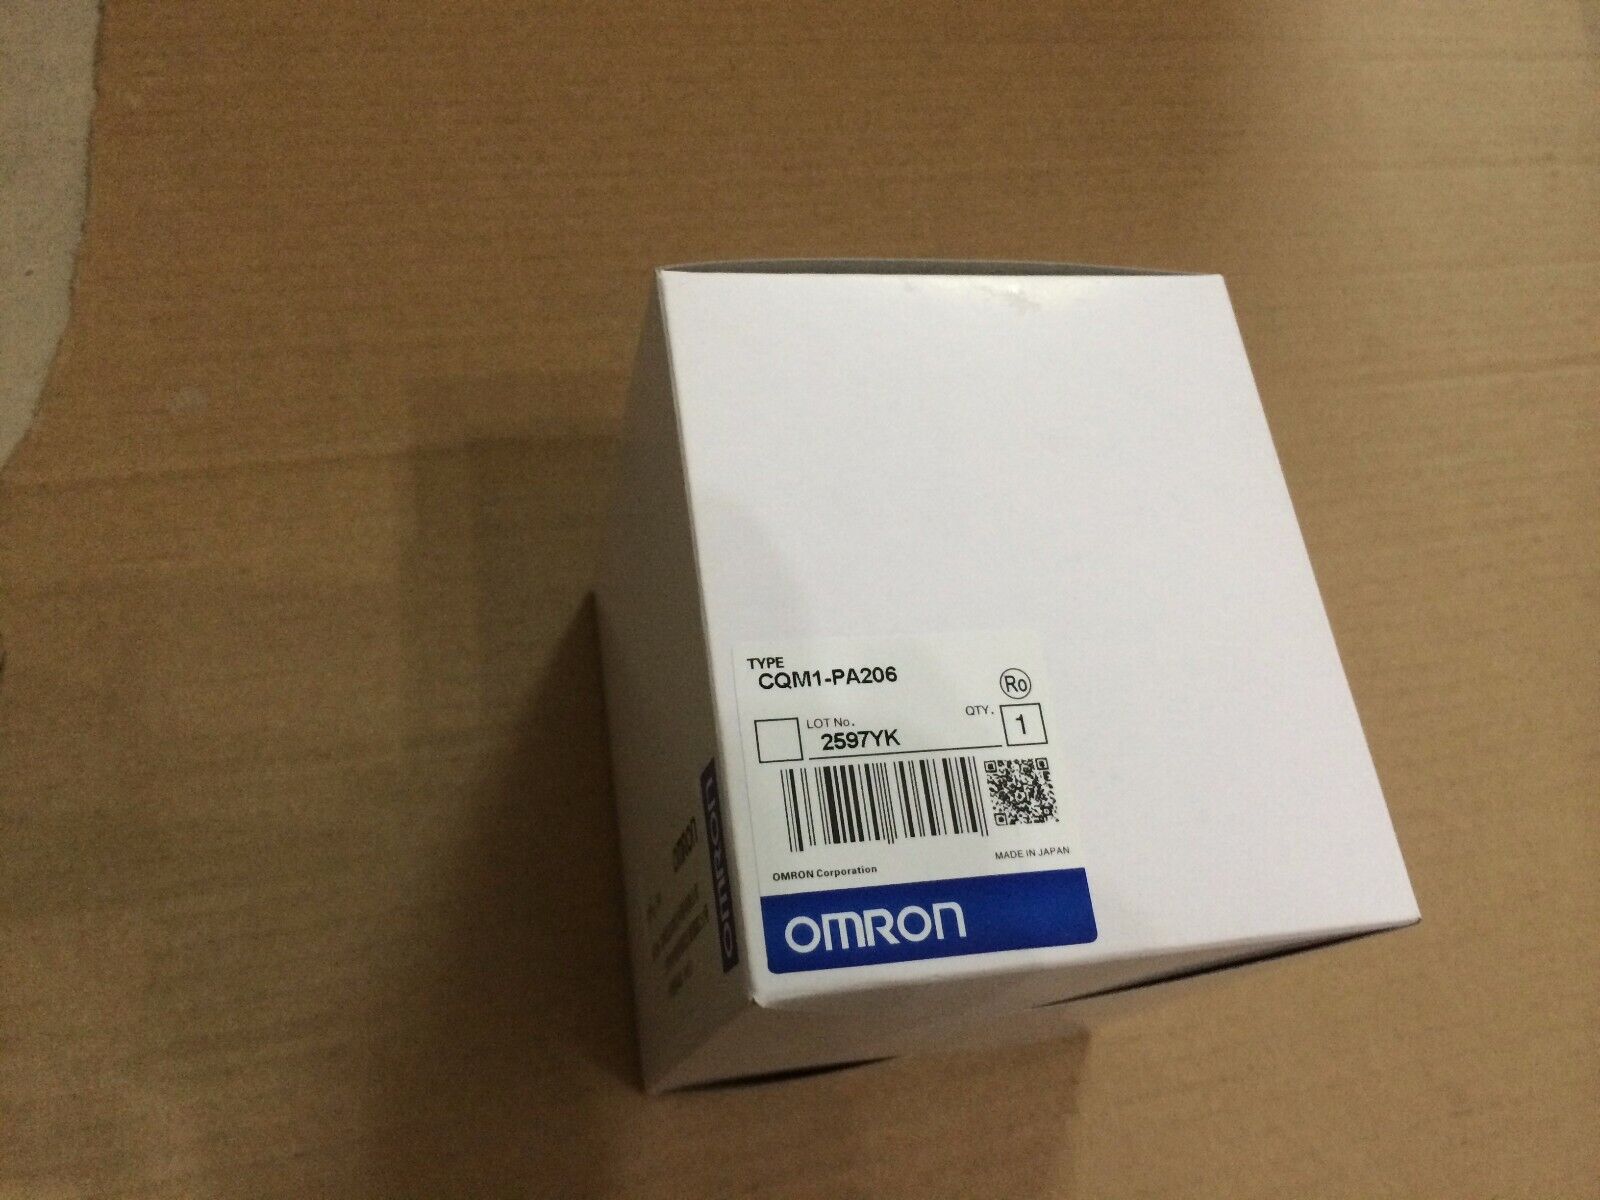 OMRON POWER SUPPLY UNIT CQM1-PA206 CQM1PA206 NEW FREE EXPEDITED SHIPPING 